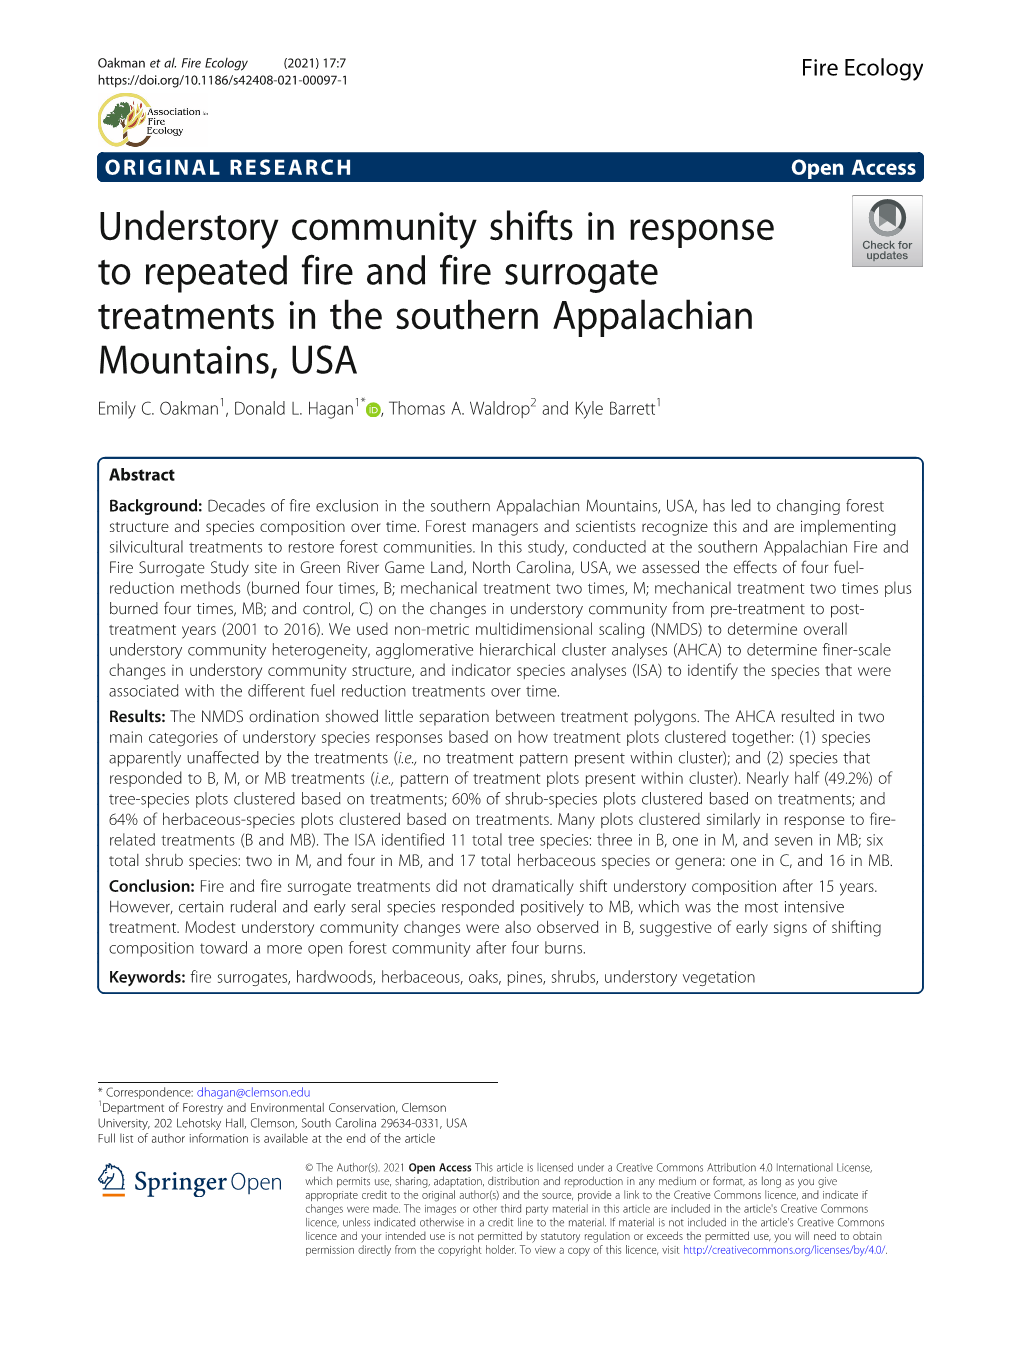 Understory Community Shifts in Response to Repeated Fire and Fire Surrogate Treatments in the Southern Appalachian Mountains, USA Emily C